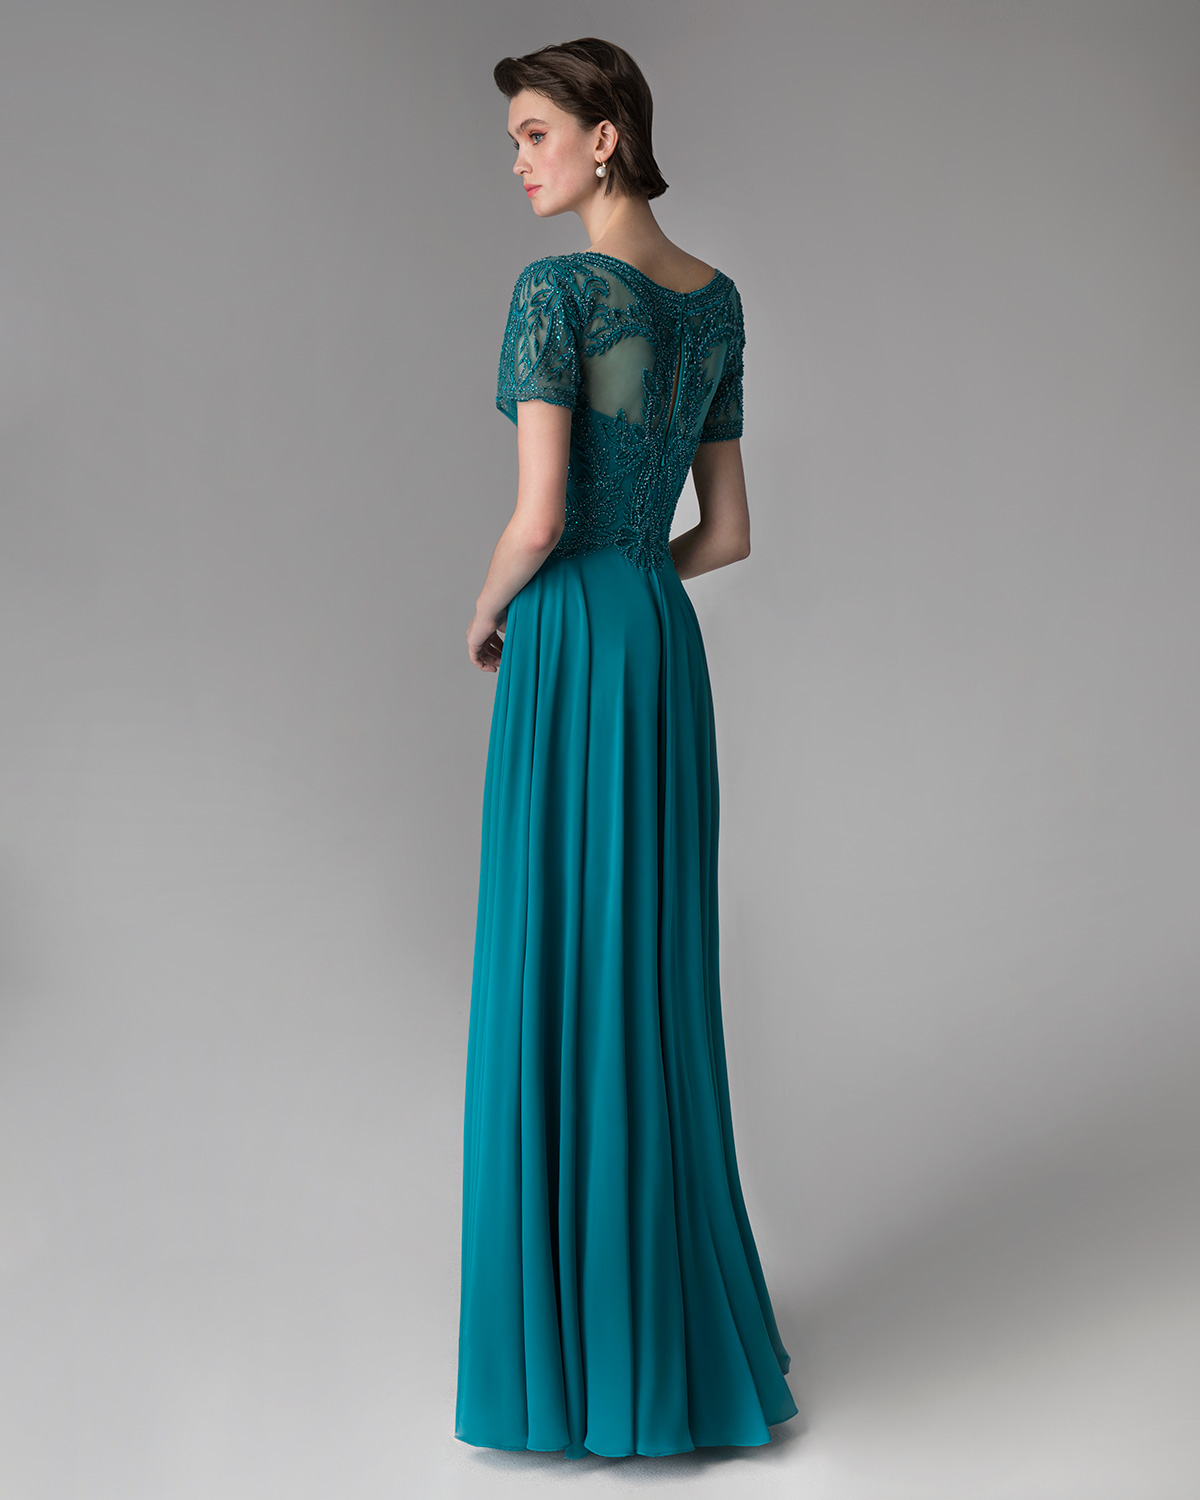 Long evening dress for the mother of the bride with fully beaded top and short sleeves